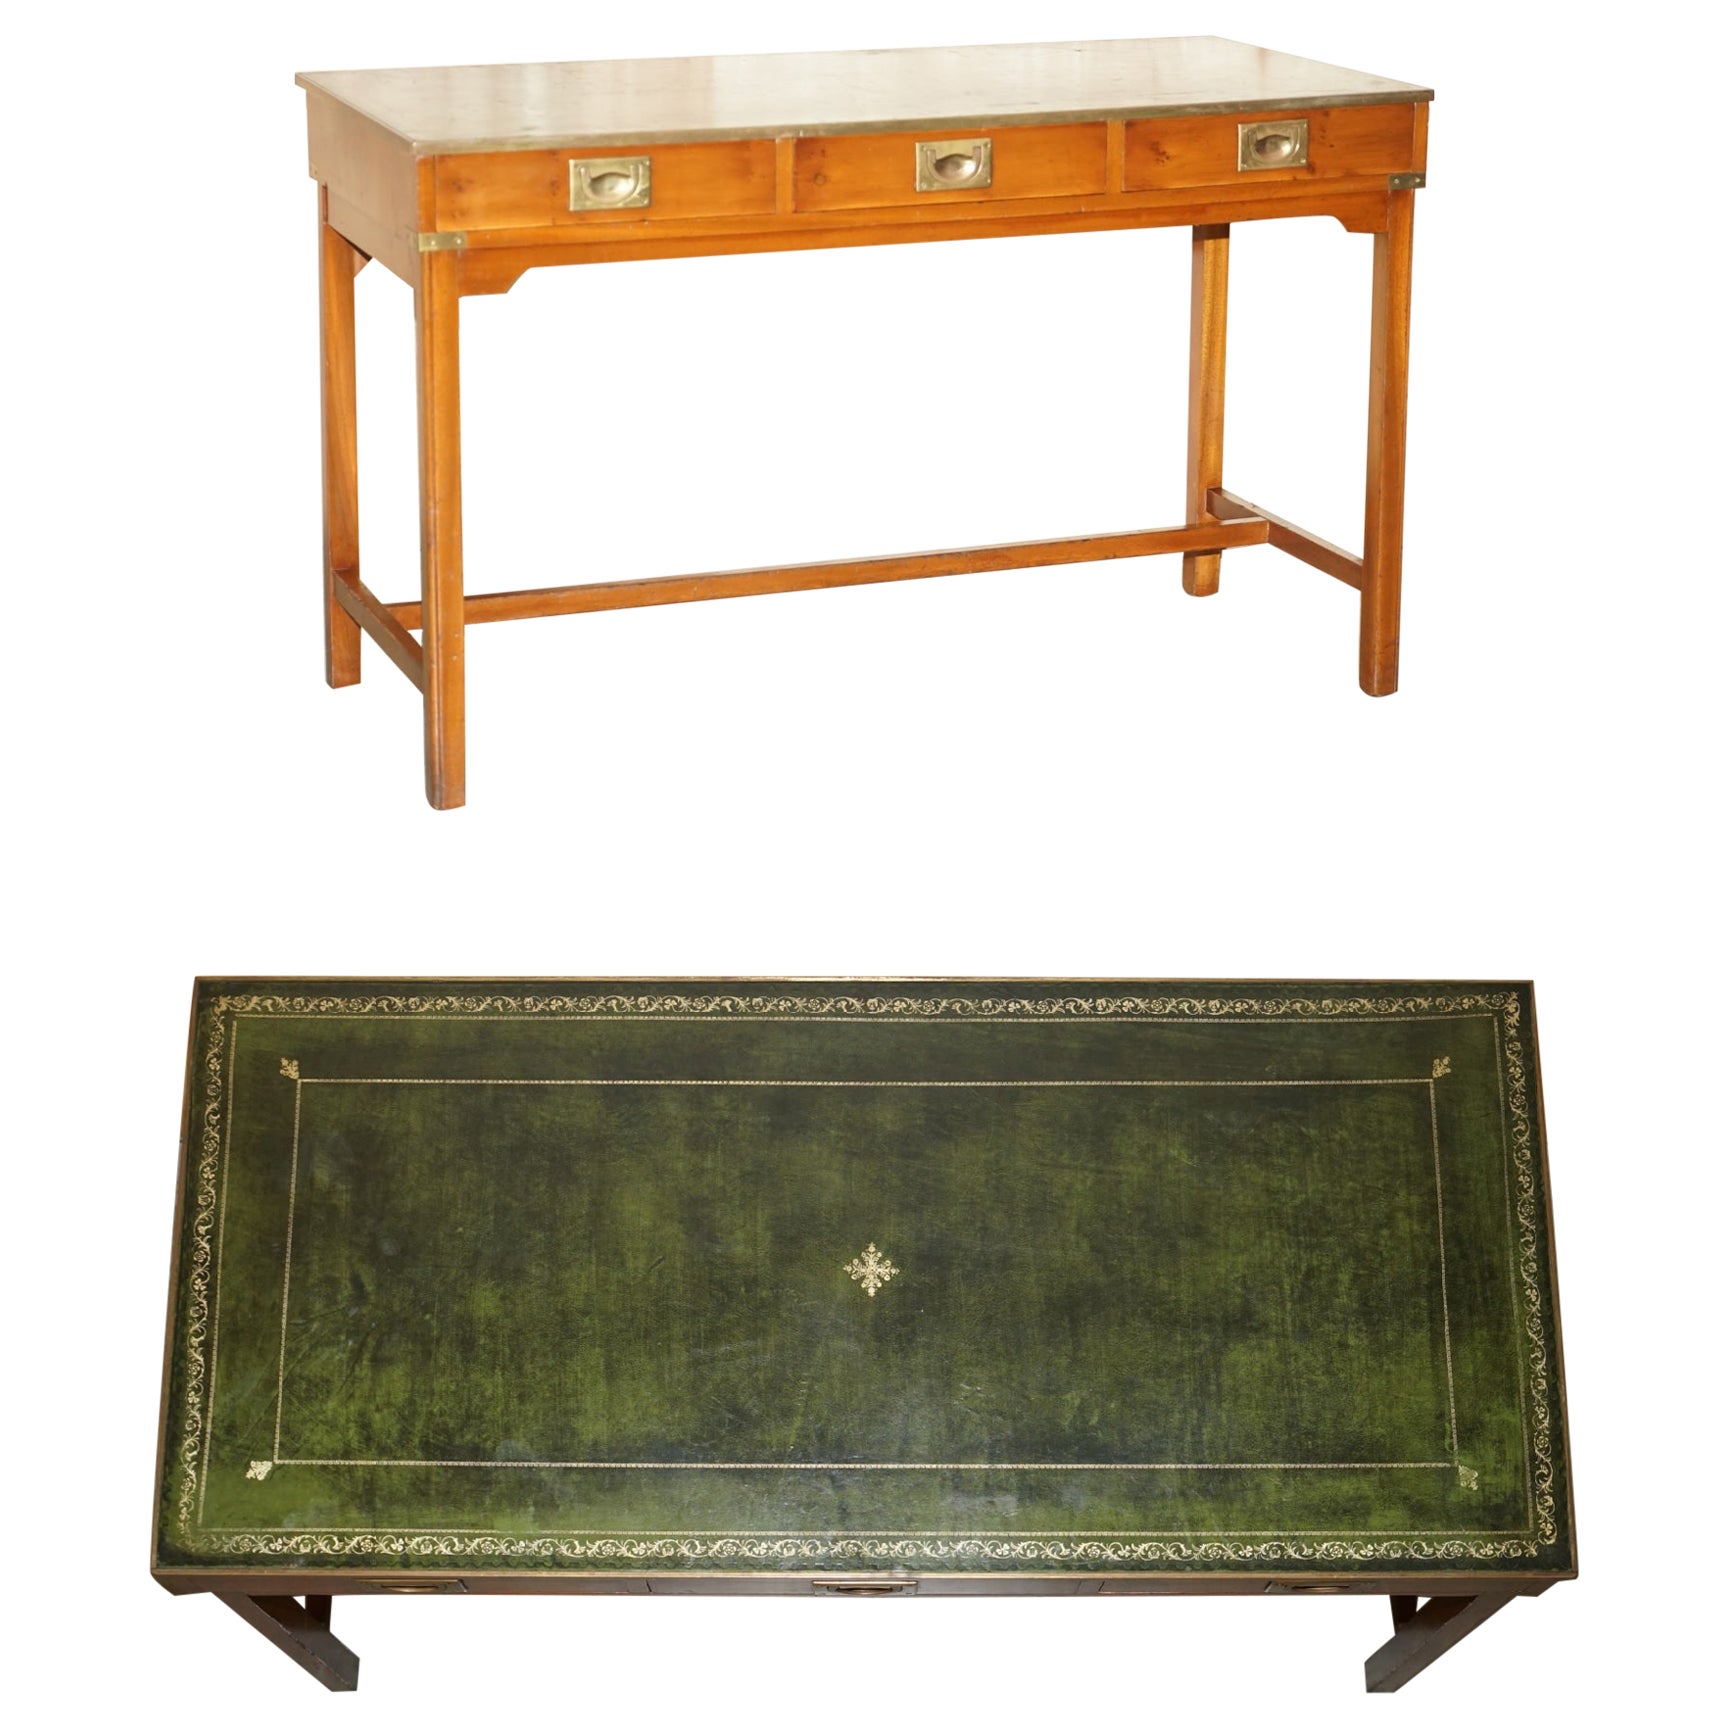 HARRODS KENNEDY BURR YEW WOOD MiLITARY CAMPAIGN GREEN LEATHER WRITING TABLE DESK